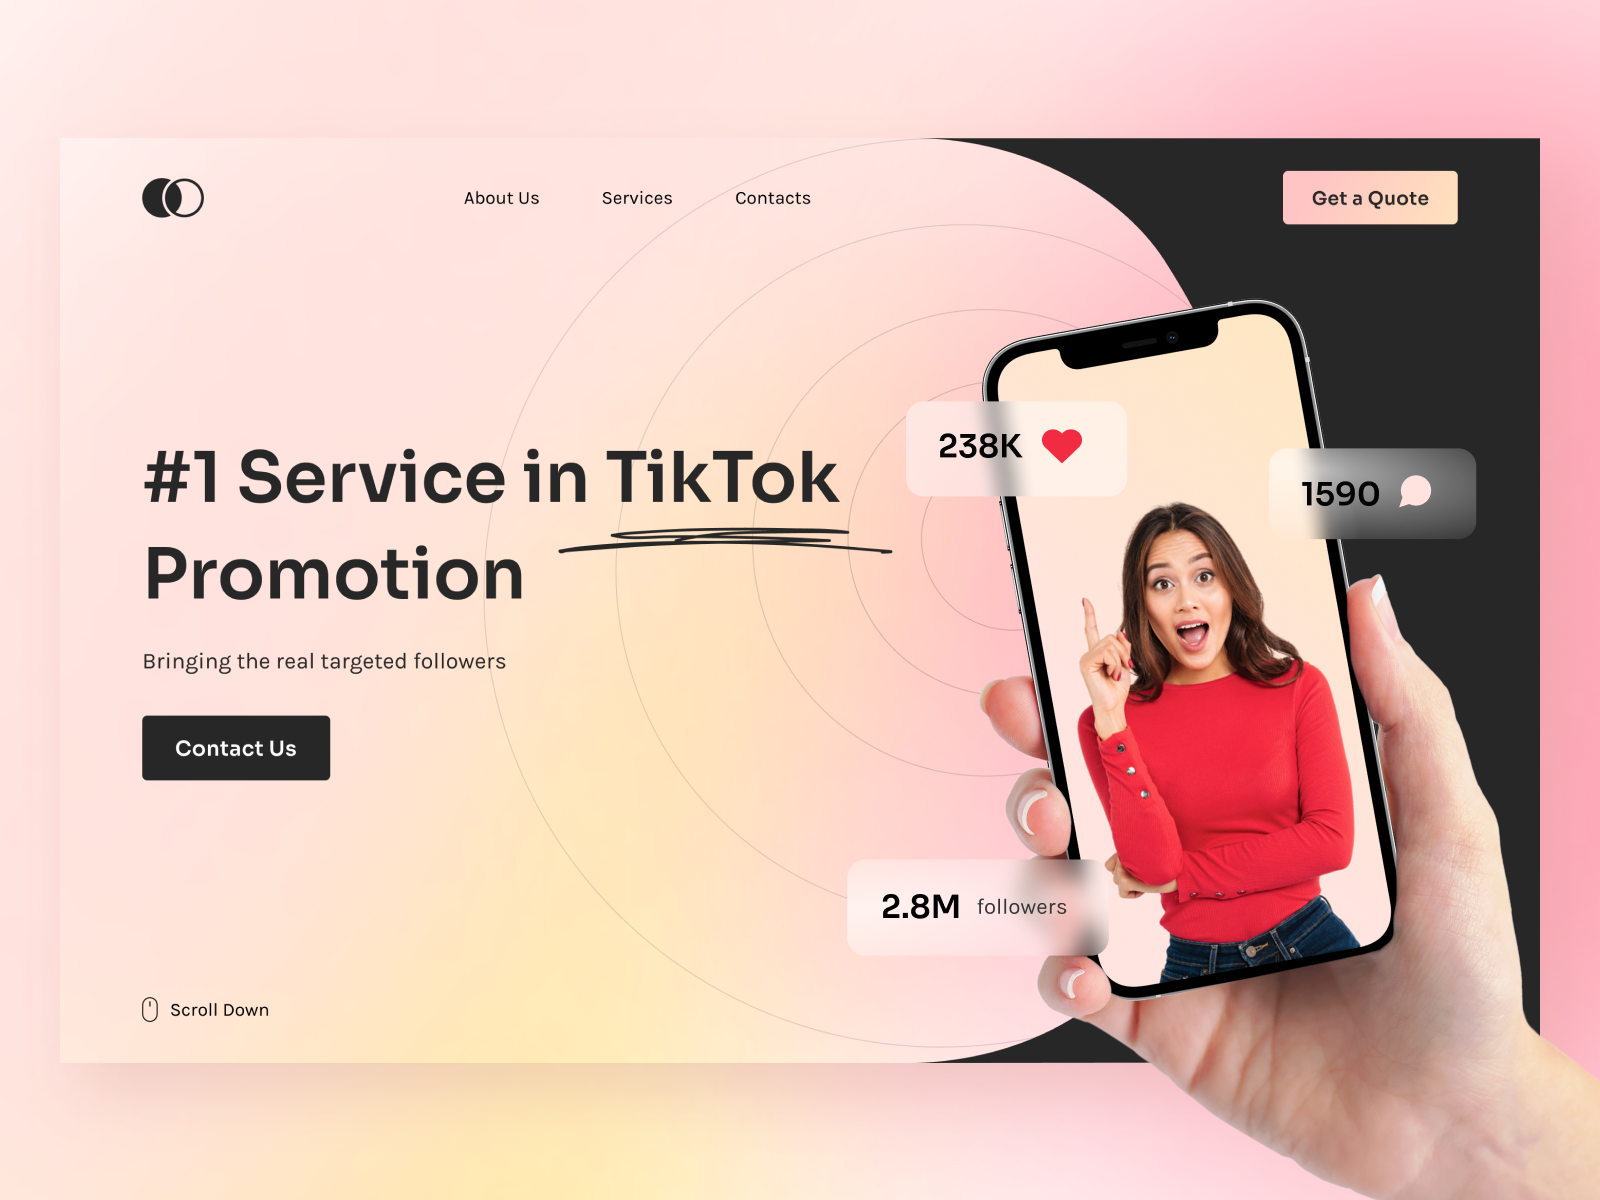 Tiktok Promotion Service Landing Page by Bogdan Falin for QClay on Dribbble